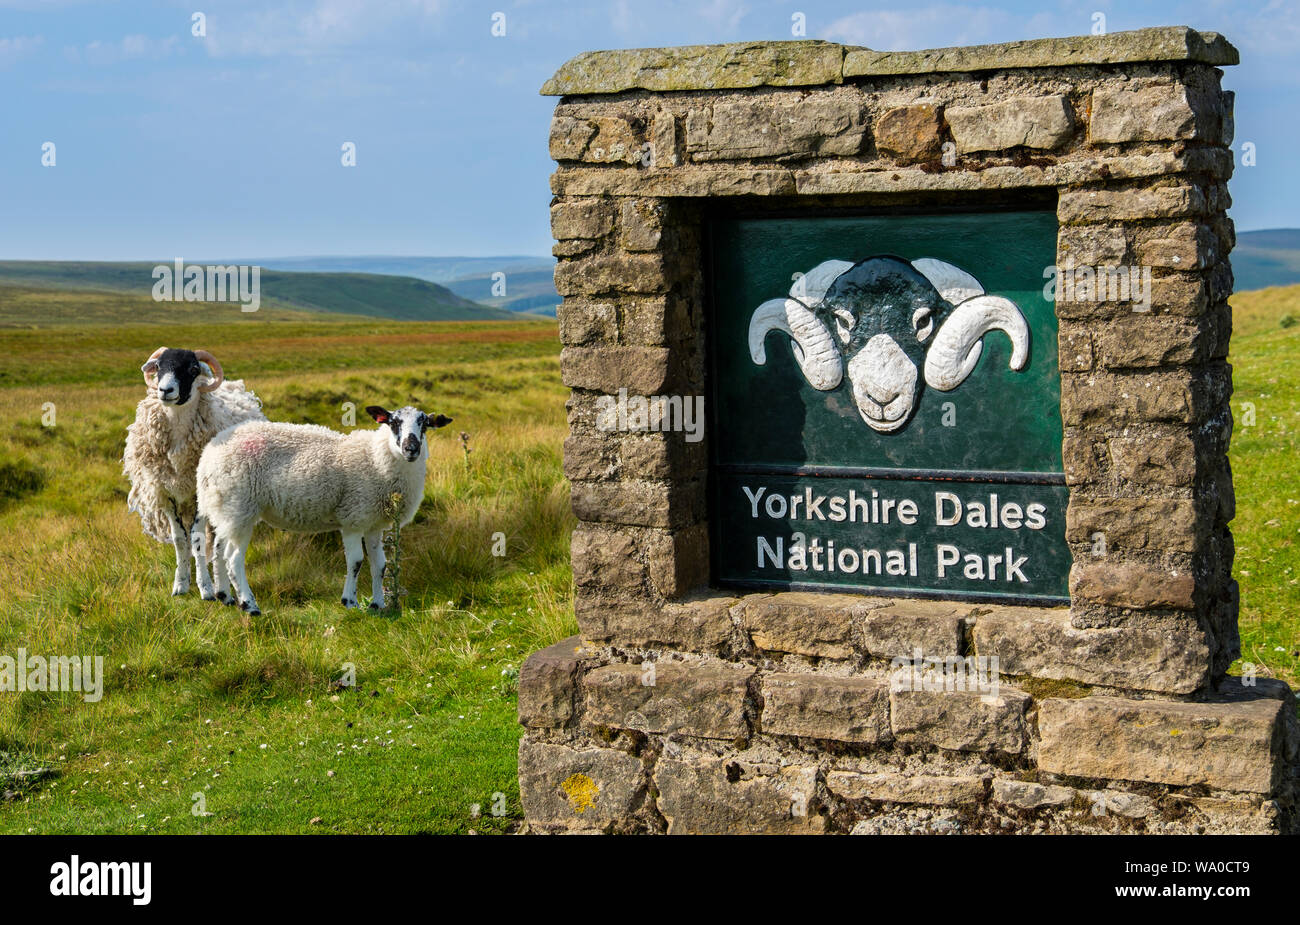 Sign for the Yorkshire Dales National Park and Swaledale sheep. Stock Photo